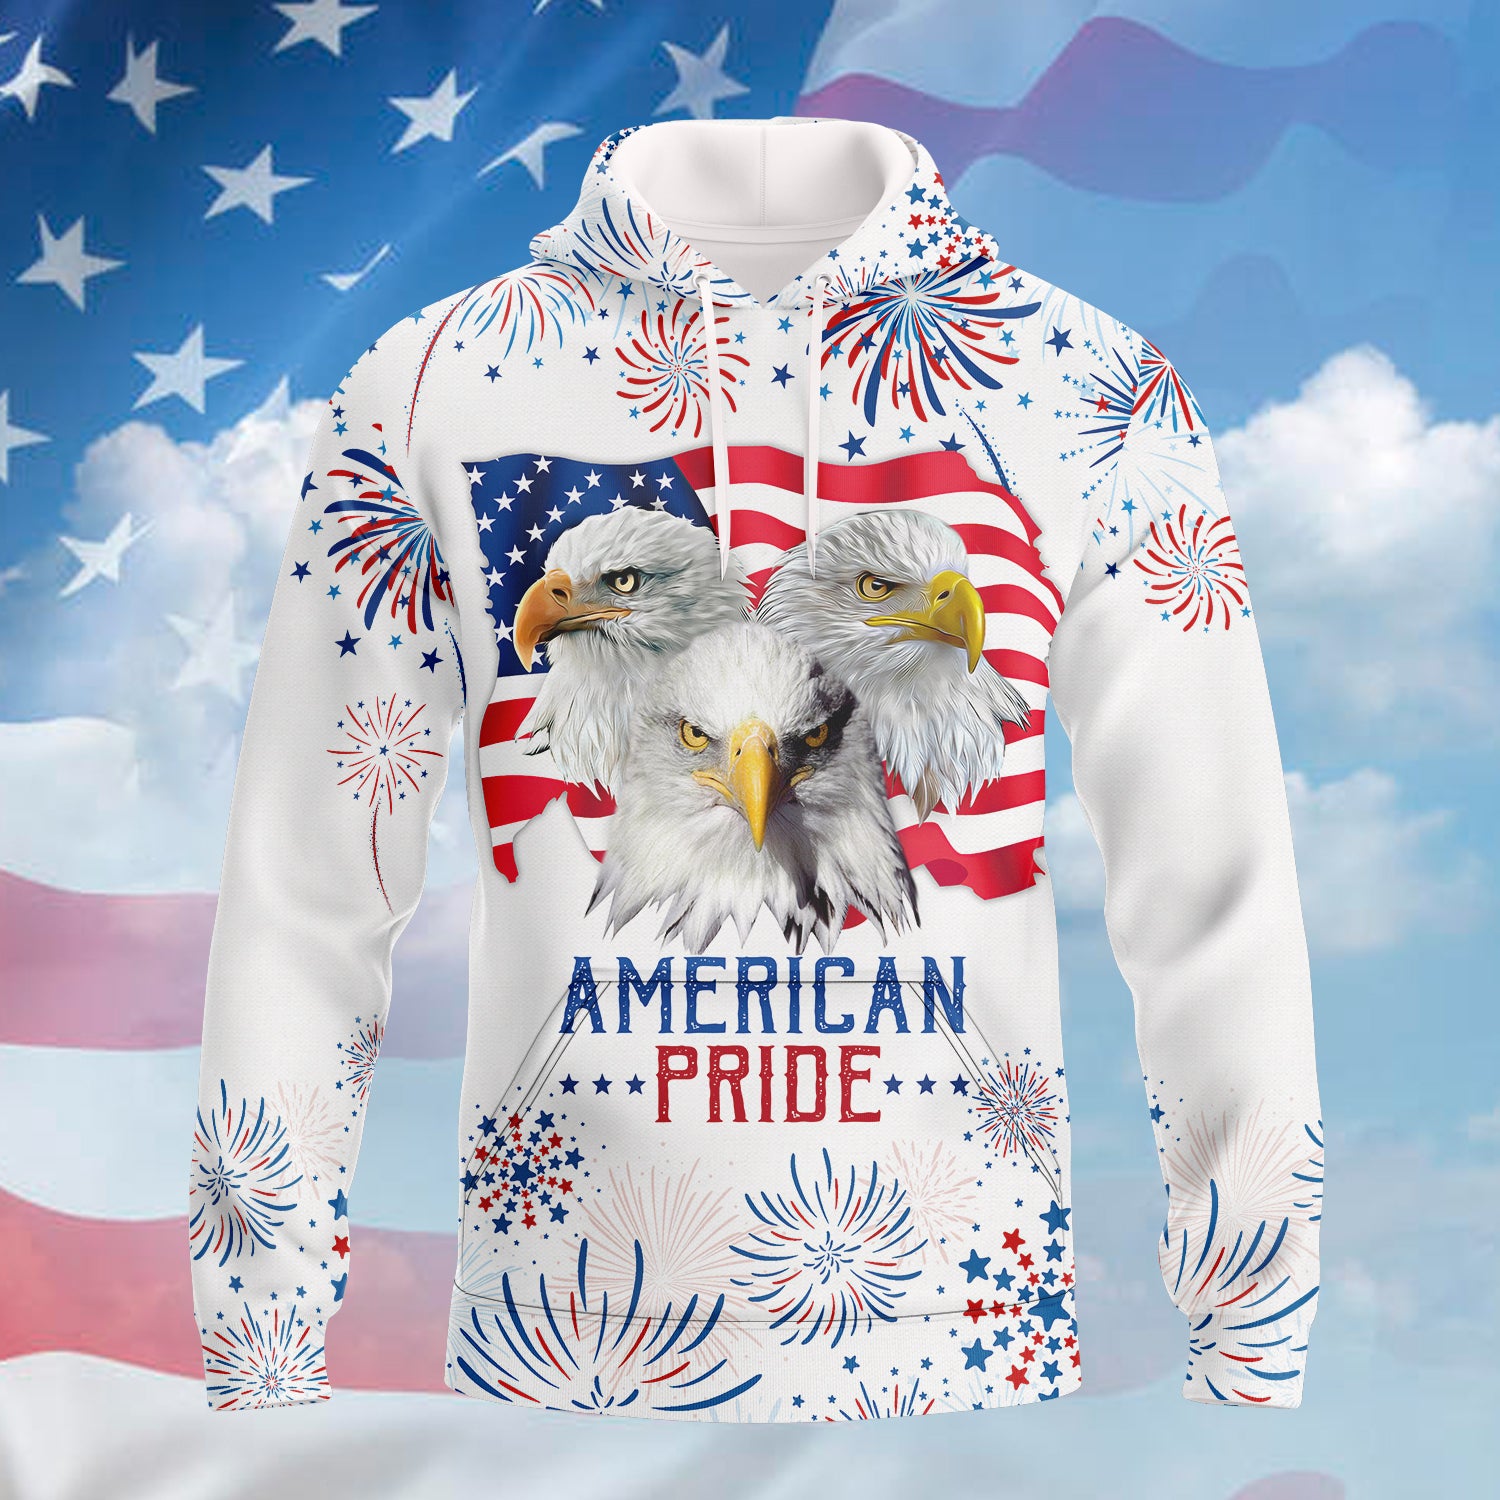 Eagle American Pride - Independence Day Is Coming - 3D Full Print Tad 494